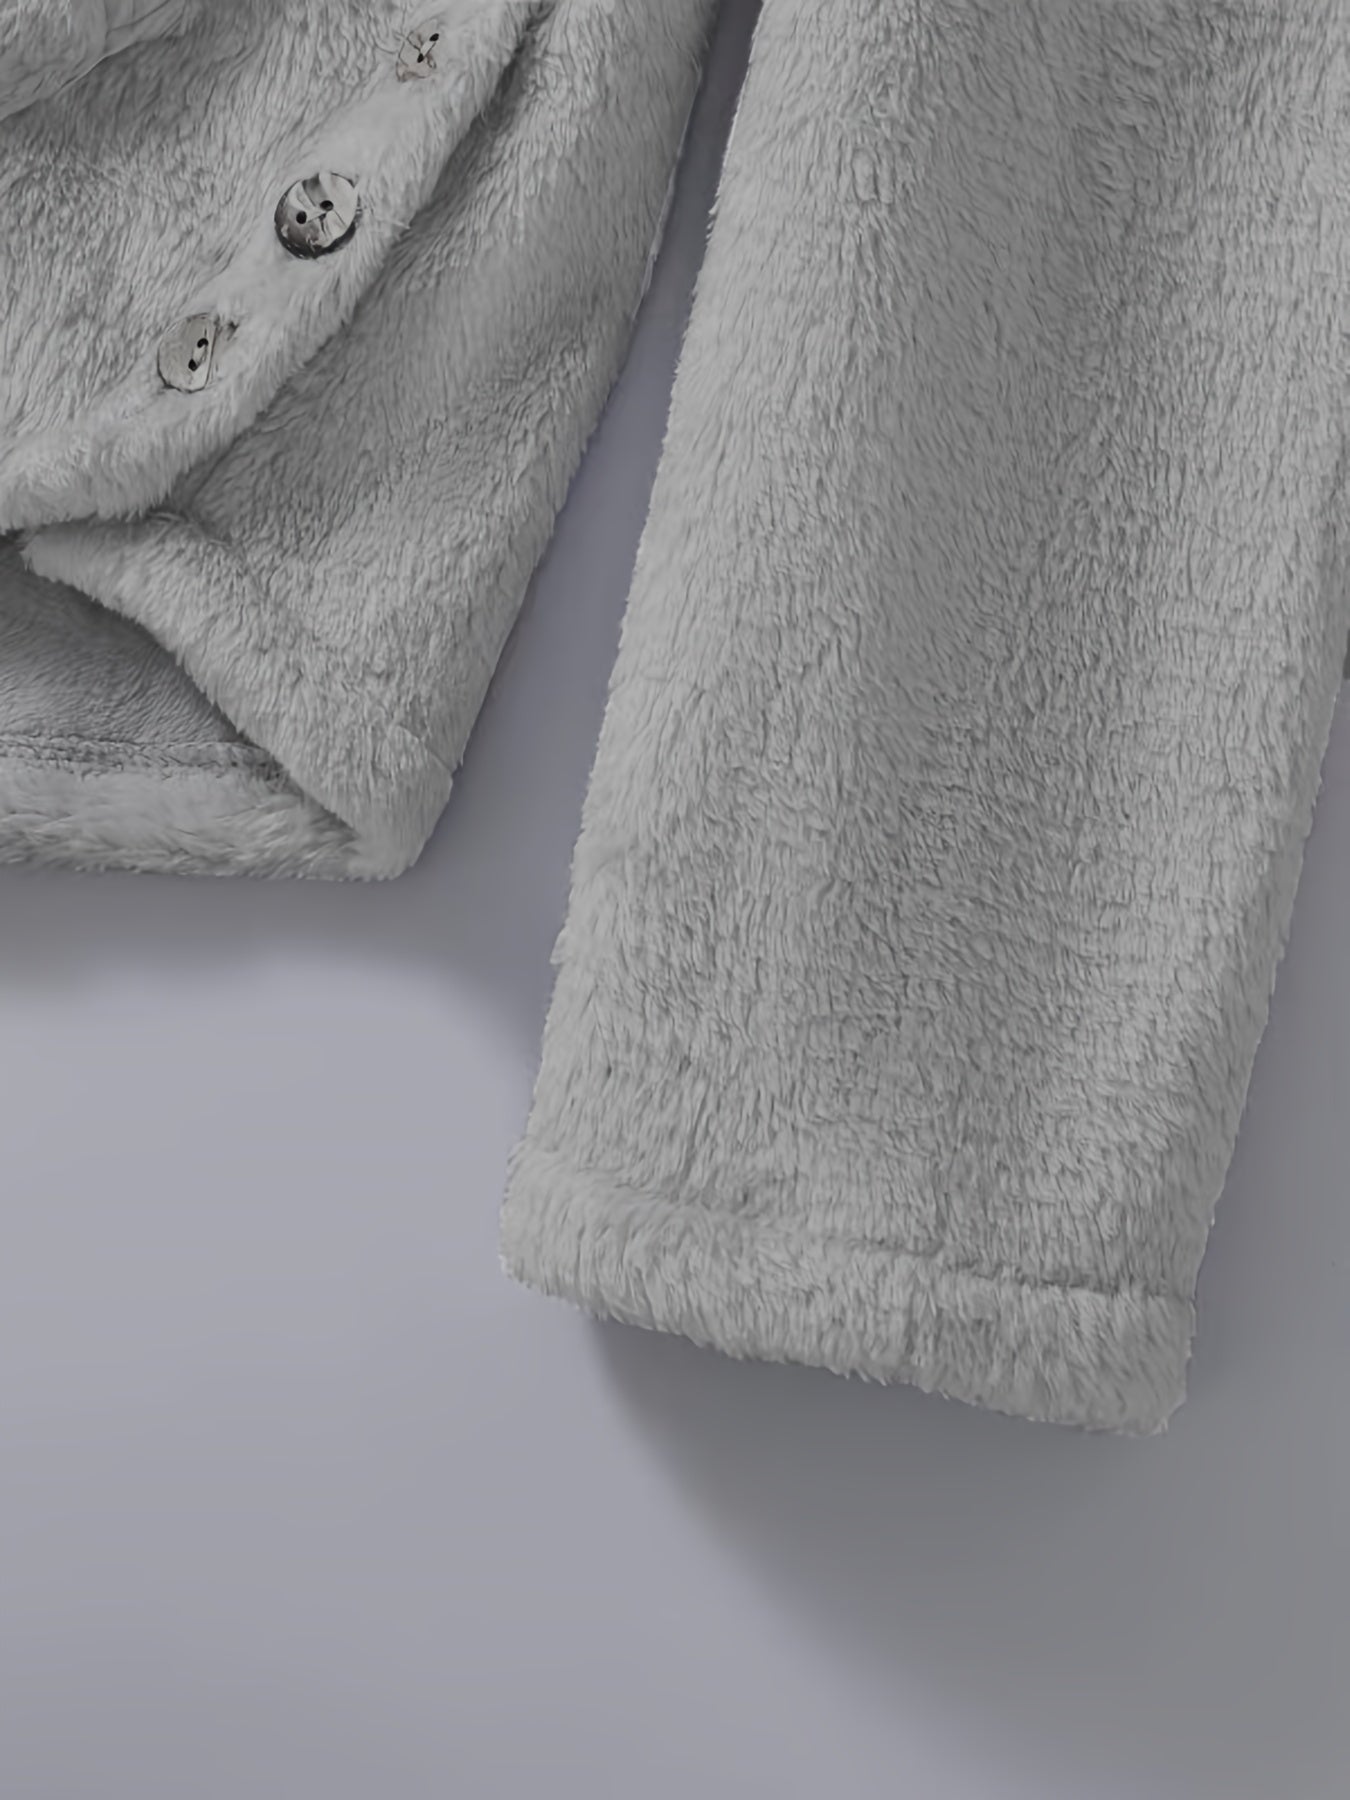 Close-up of a light gray, fluffy fabric garment with buttons, showing a portion of a sleeve and part of the body section. This cozy comfortable winter wear is perfect for chilly days. Introducing the Maramalive™ Graphic Print Fluffy Loose Cat Ears Hoodie, Casual Hooded Pocket Fashion Long Sleeve Sweatshirt for Women's Clothing.